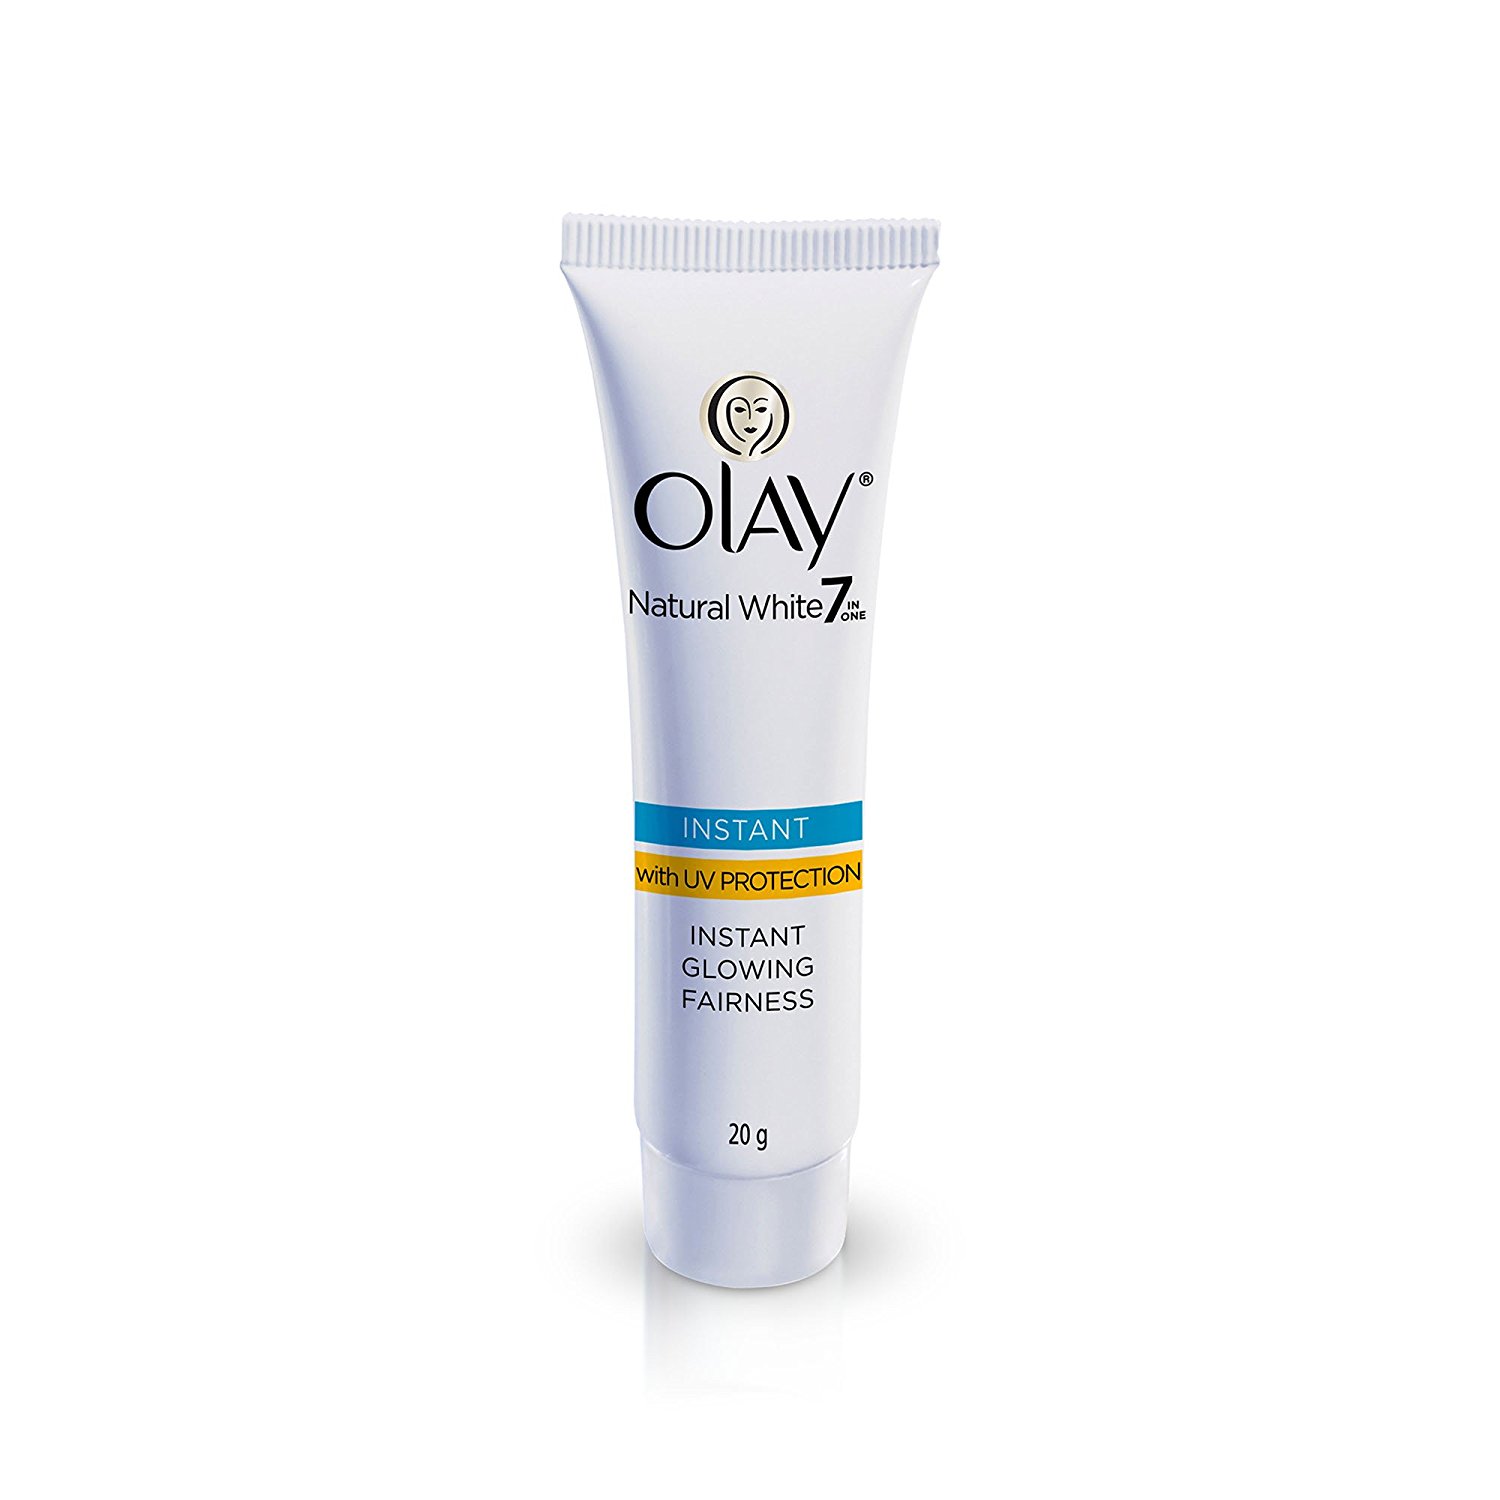 Olay Natural White Insta Glowing 20gm